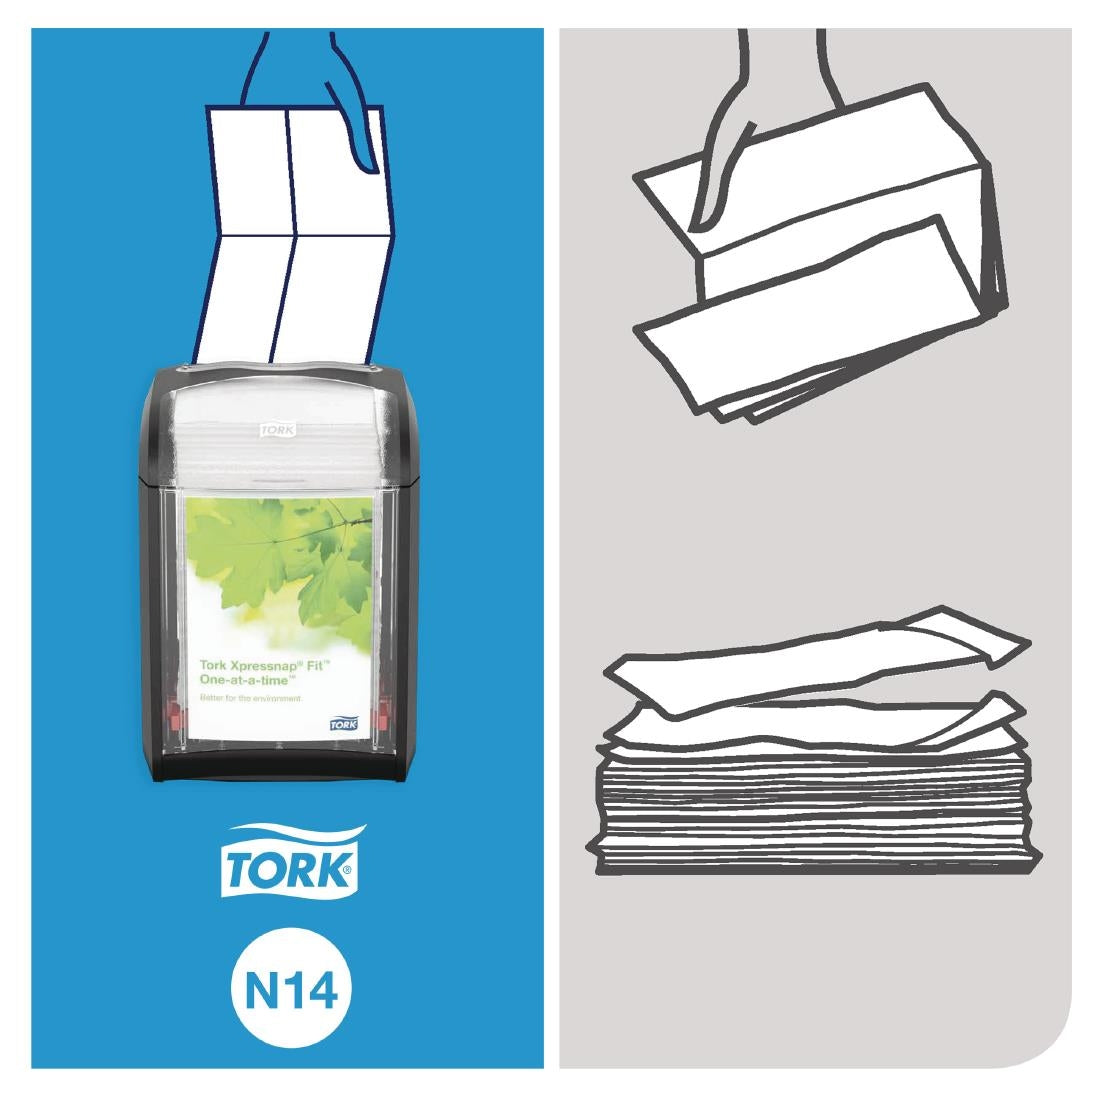 FS372 Tork Xpressnap Fit Recycled Dispenser Napkin Natural 2Ply (Pack of 6x720) JD Catering Equipment Solutions Ltd